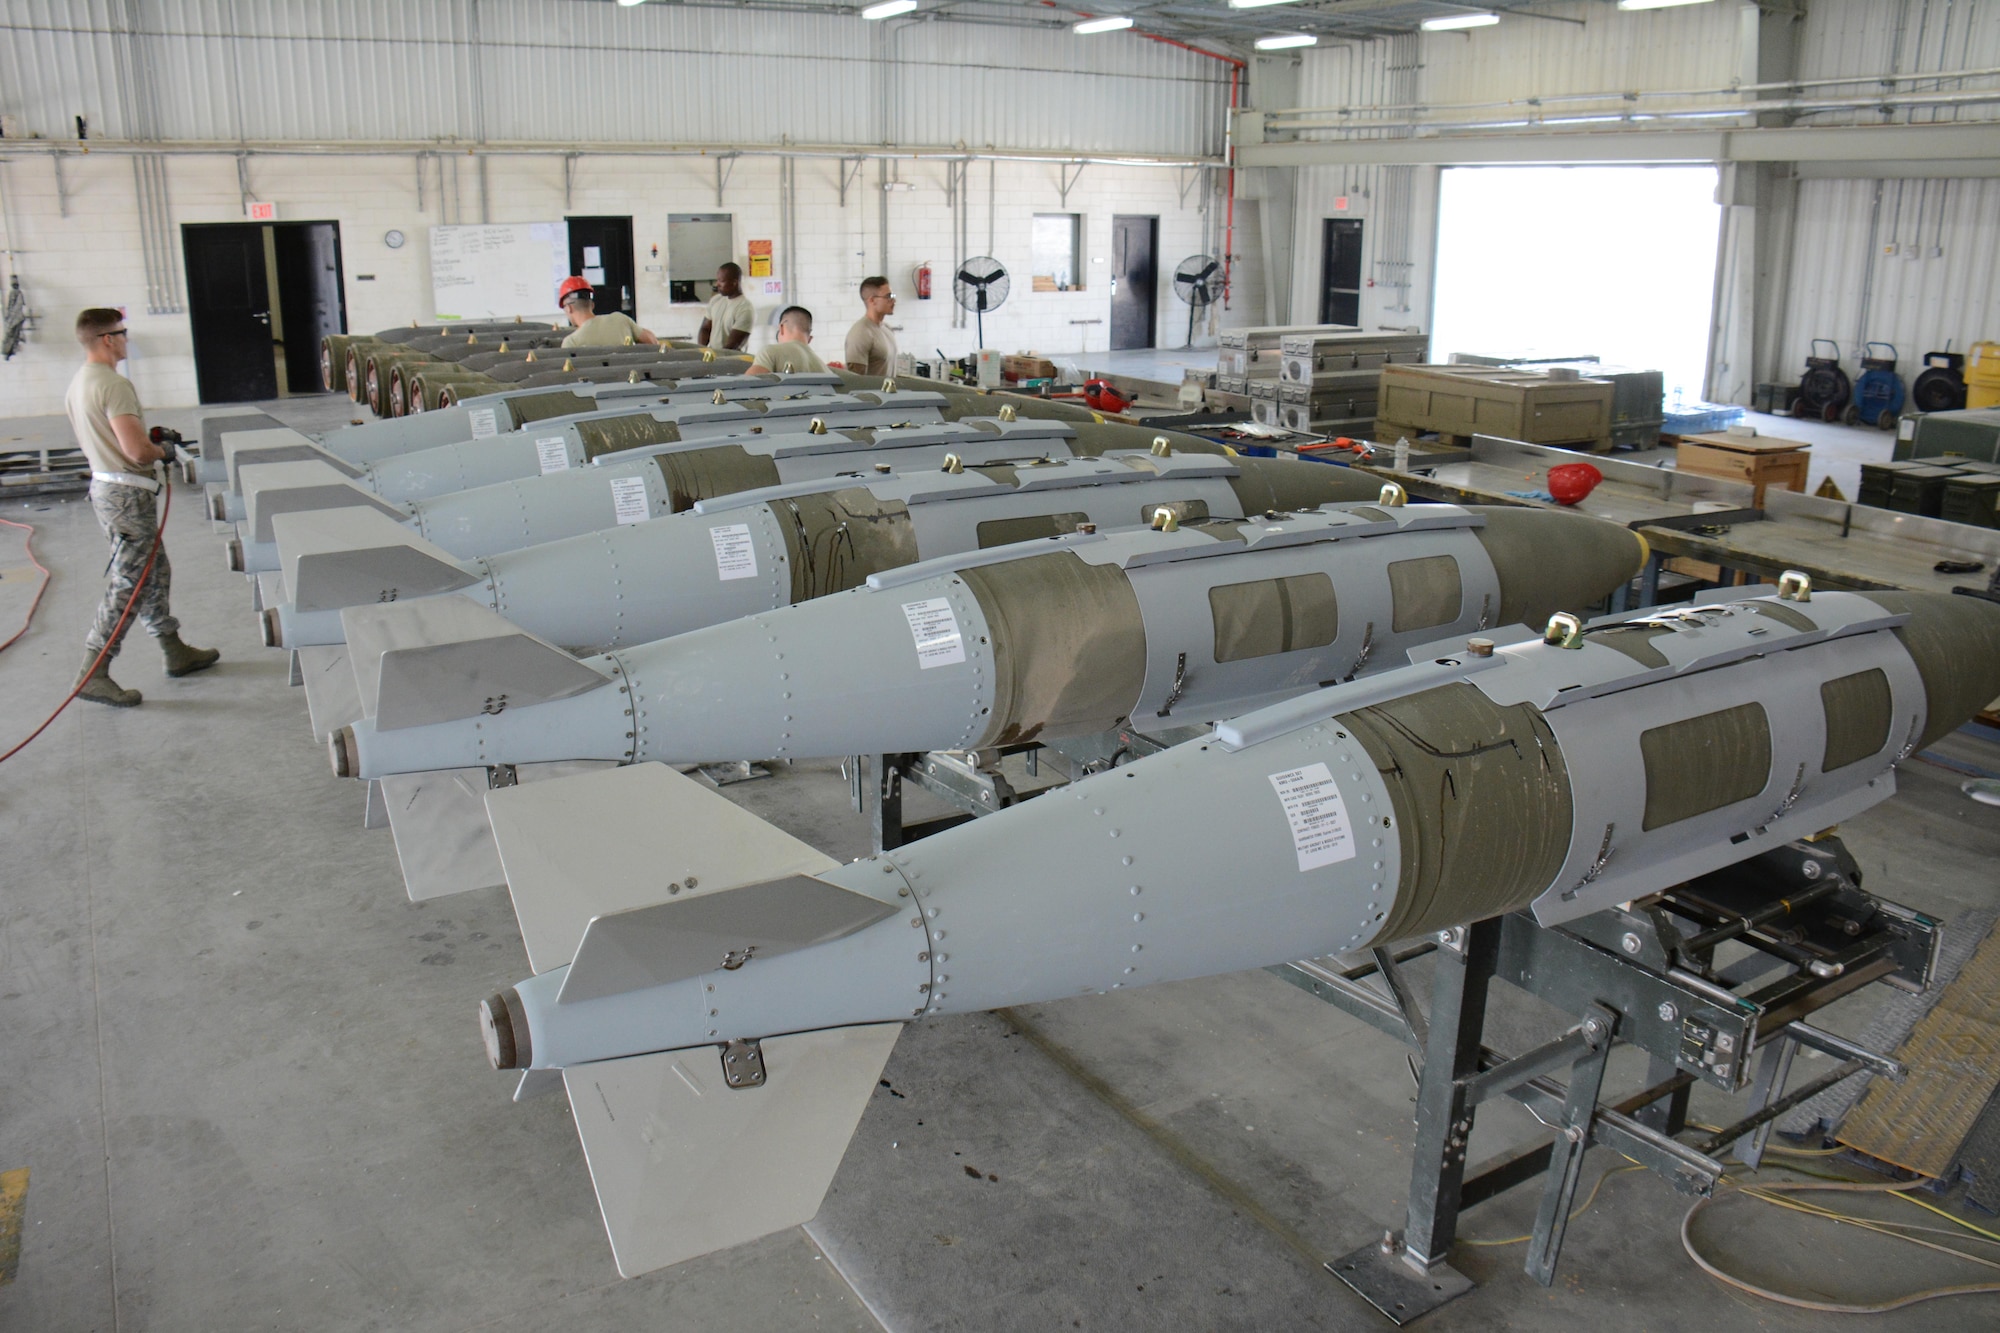 A dozen 2,000-pound joint direct attack munitions sit inside a warehouse at Al Udeid Air Base, Qatar Dec. 17. The bombs were built by hand by airmen from the 379th Expeditionary Maintenance Squadron’s Munitions Flight. The Munitions Flight has built nearly 4,000 bombs since July 2015. (U.S. Air Force photo by Tech. Sgt. James Hodgman/Released)